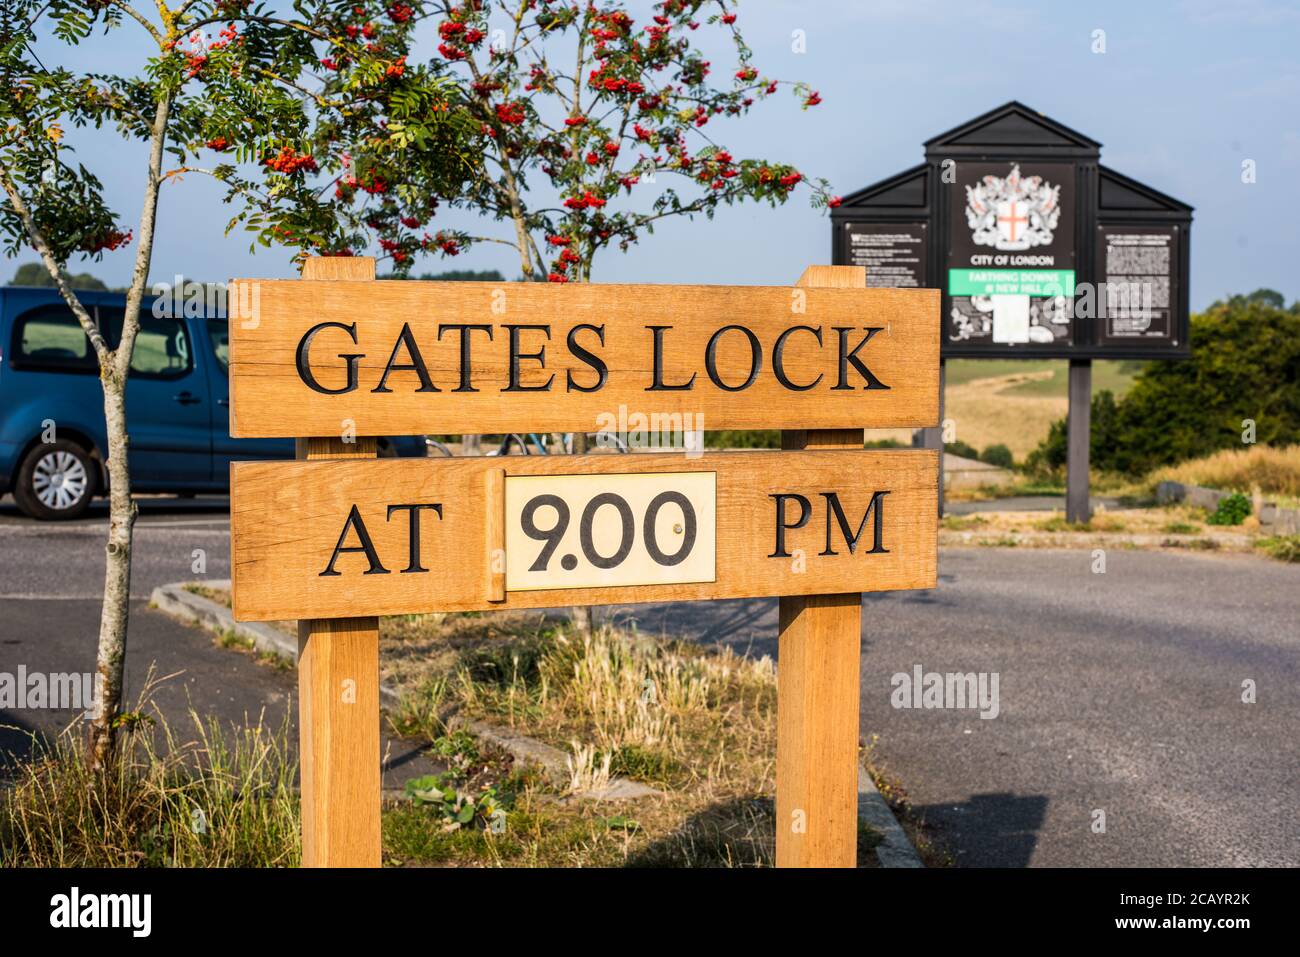 Gates lock at 9 PM sign at the car park in Farthing downs Stock Photo